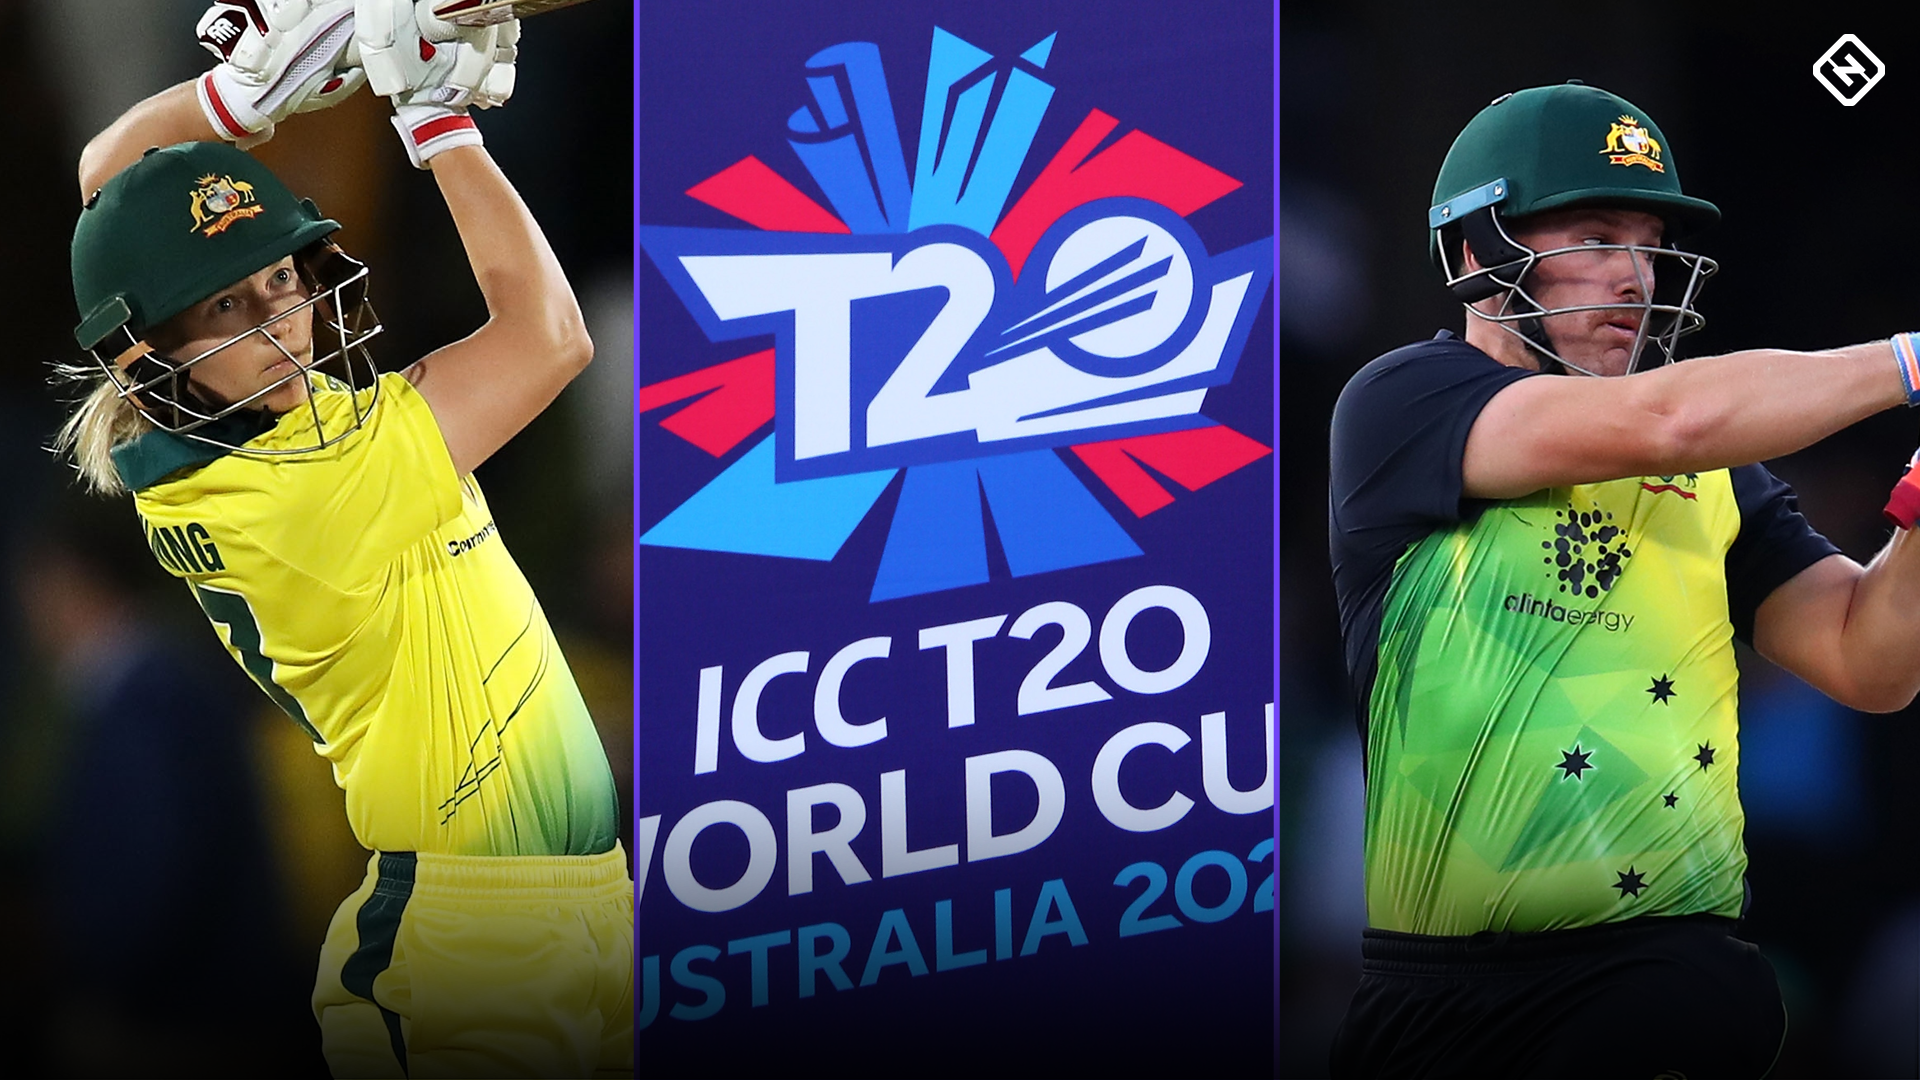 2020 ICC T20 World Cup Fixtures released for men's and women's